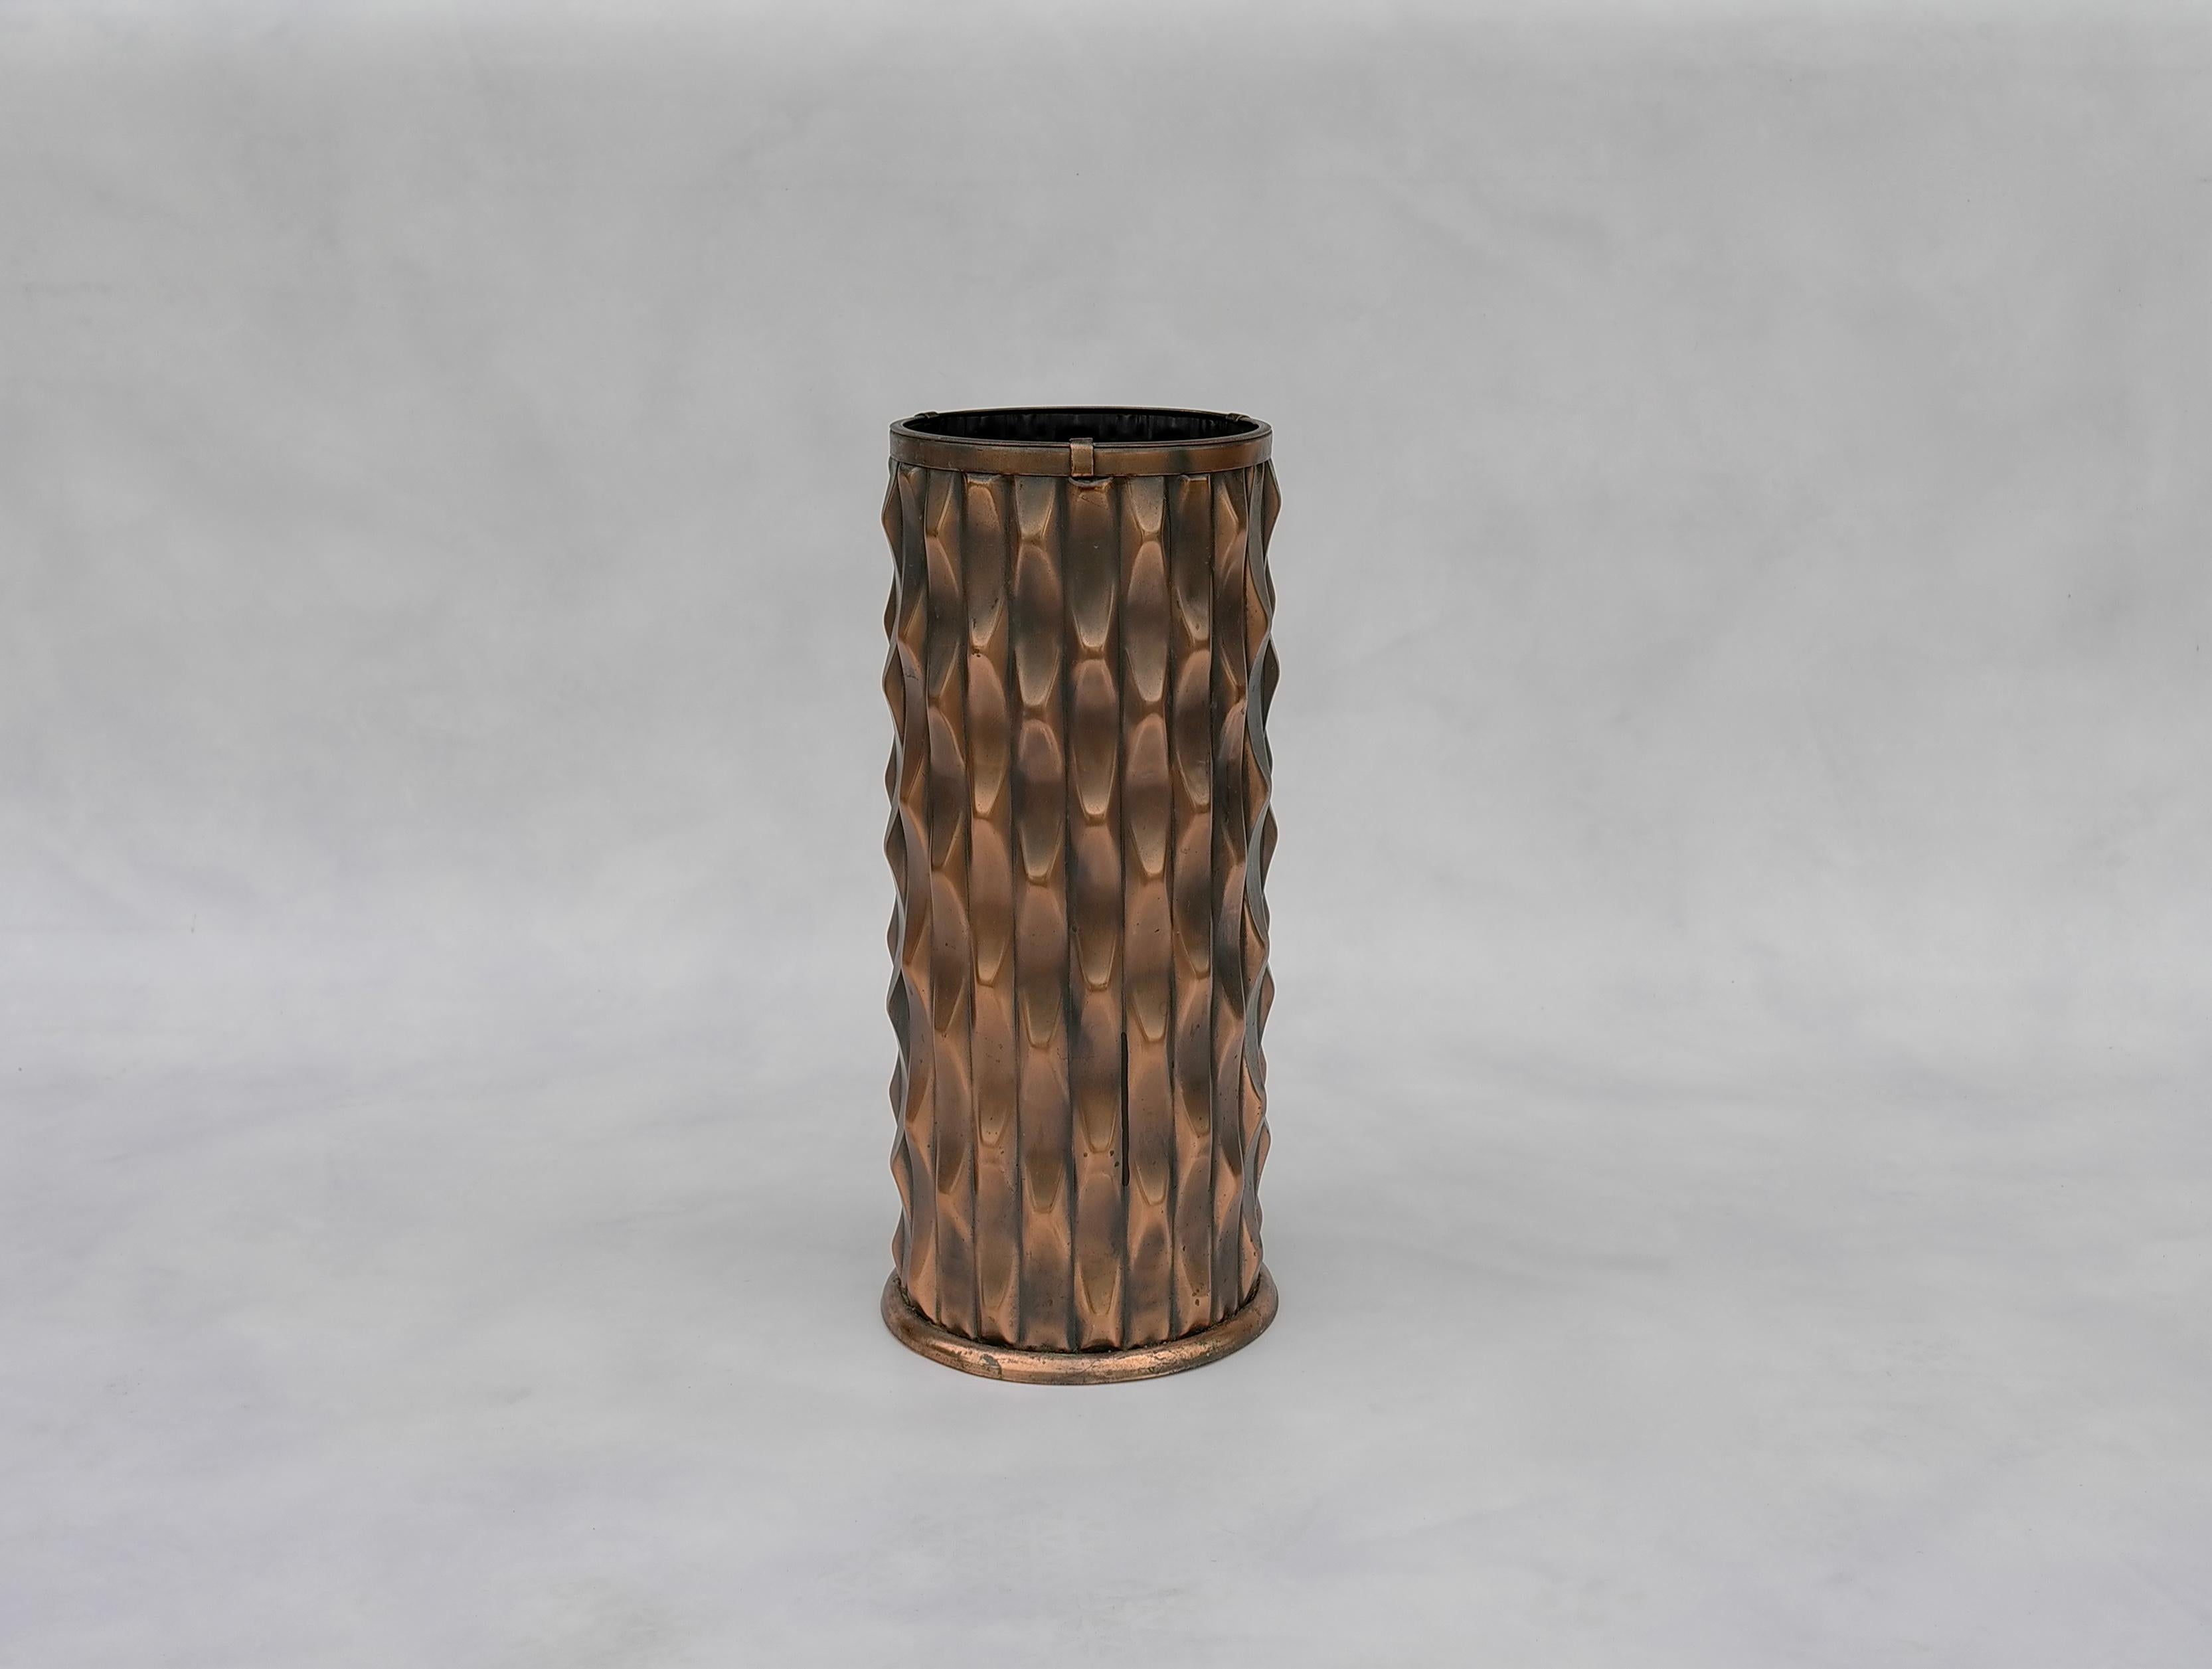 French Midcentury Geometric Art Shaped Umbrella Stand in Copper, 1960s For Sale